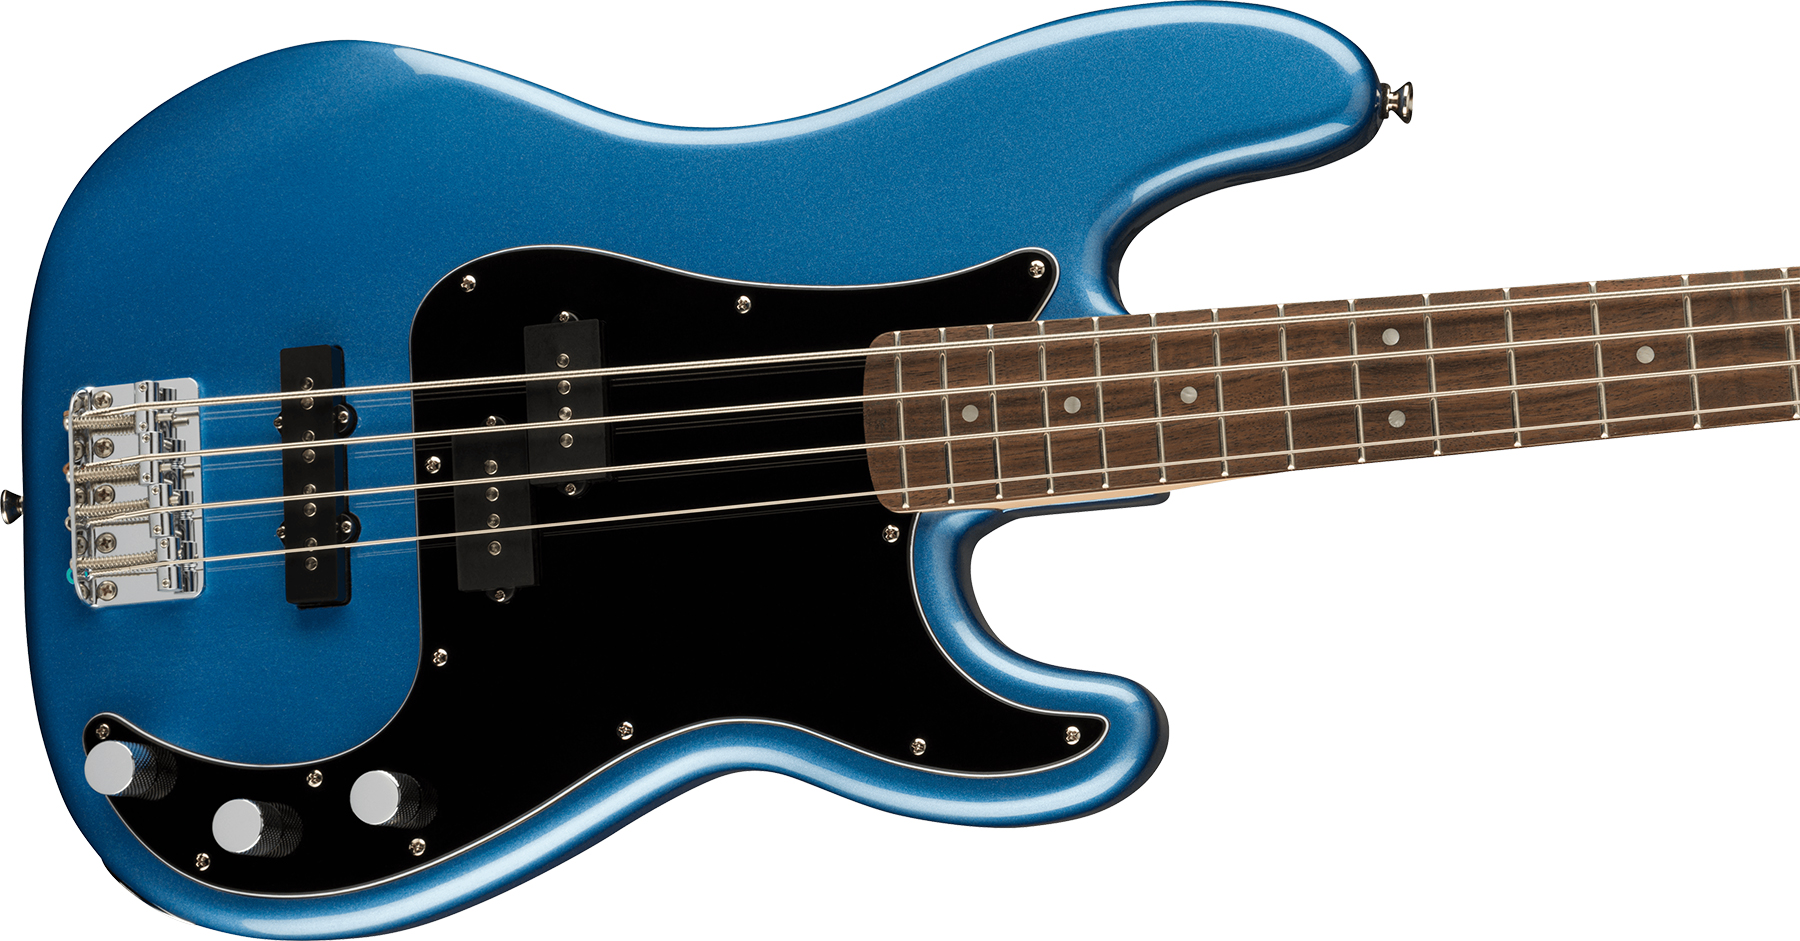 Squier Precision Bass Affinity Pj 2021 Lau - Lake Placid Blue - Solid body electric bass - Variation 2